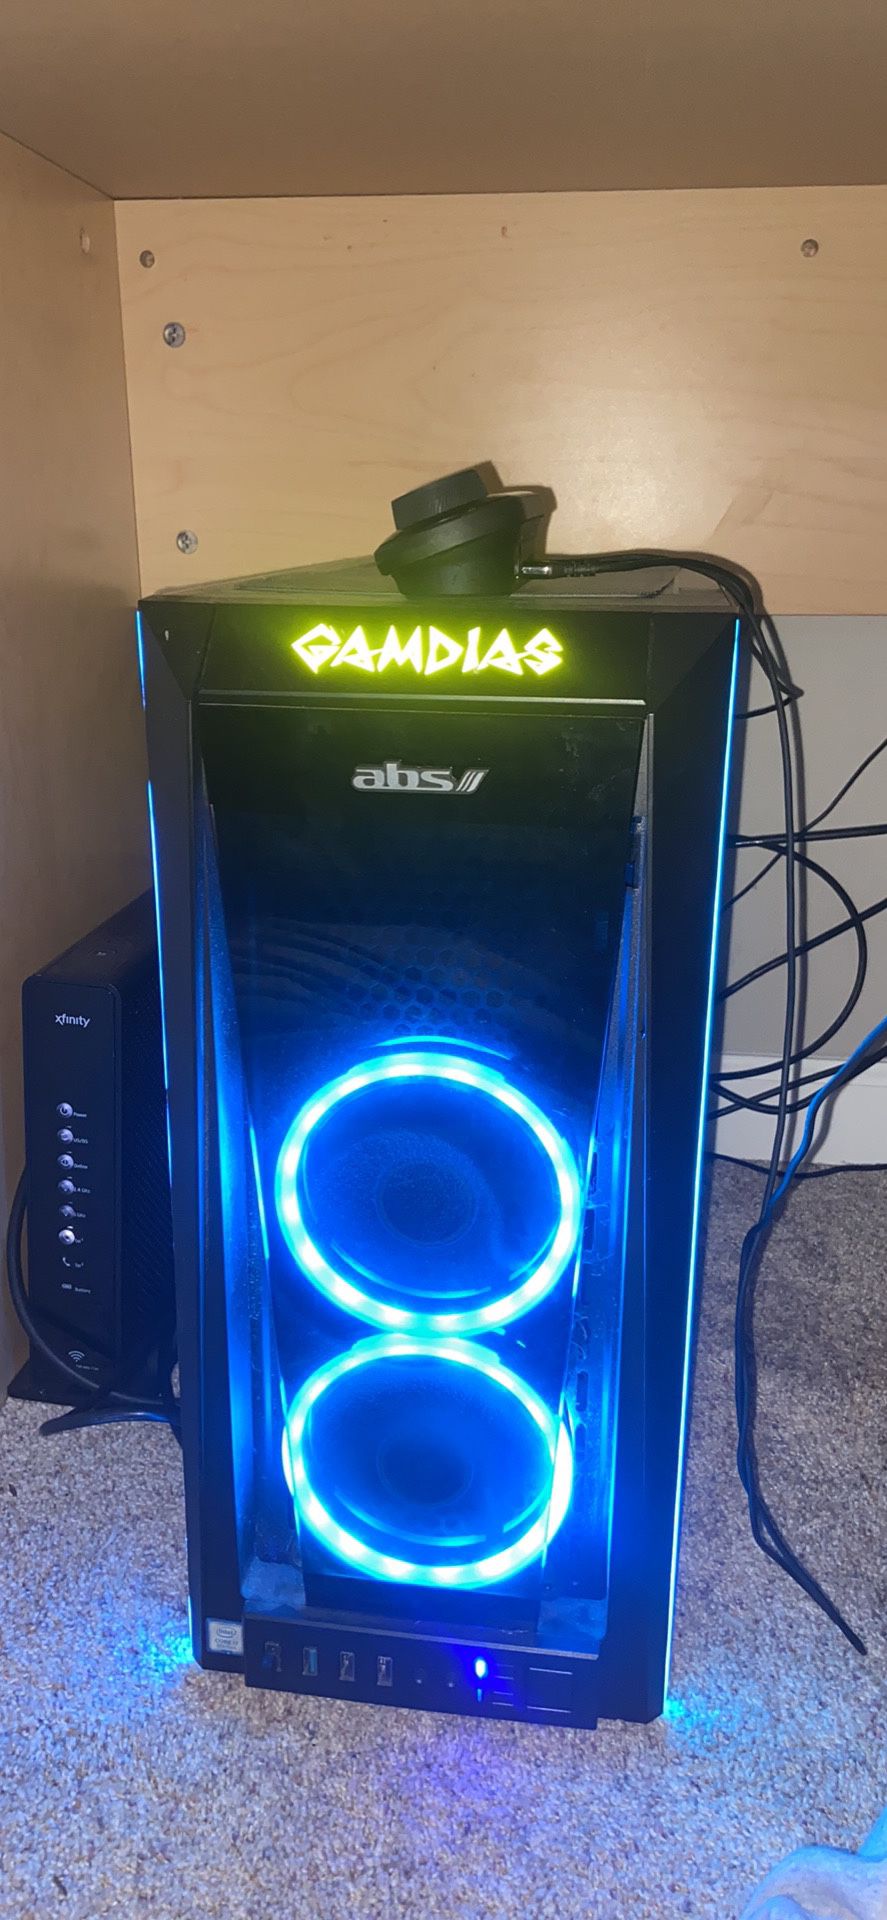 Gaming Pc great condition